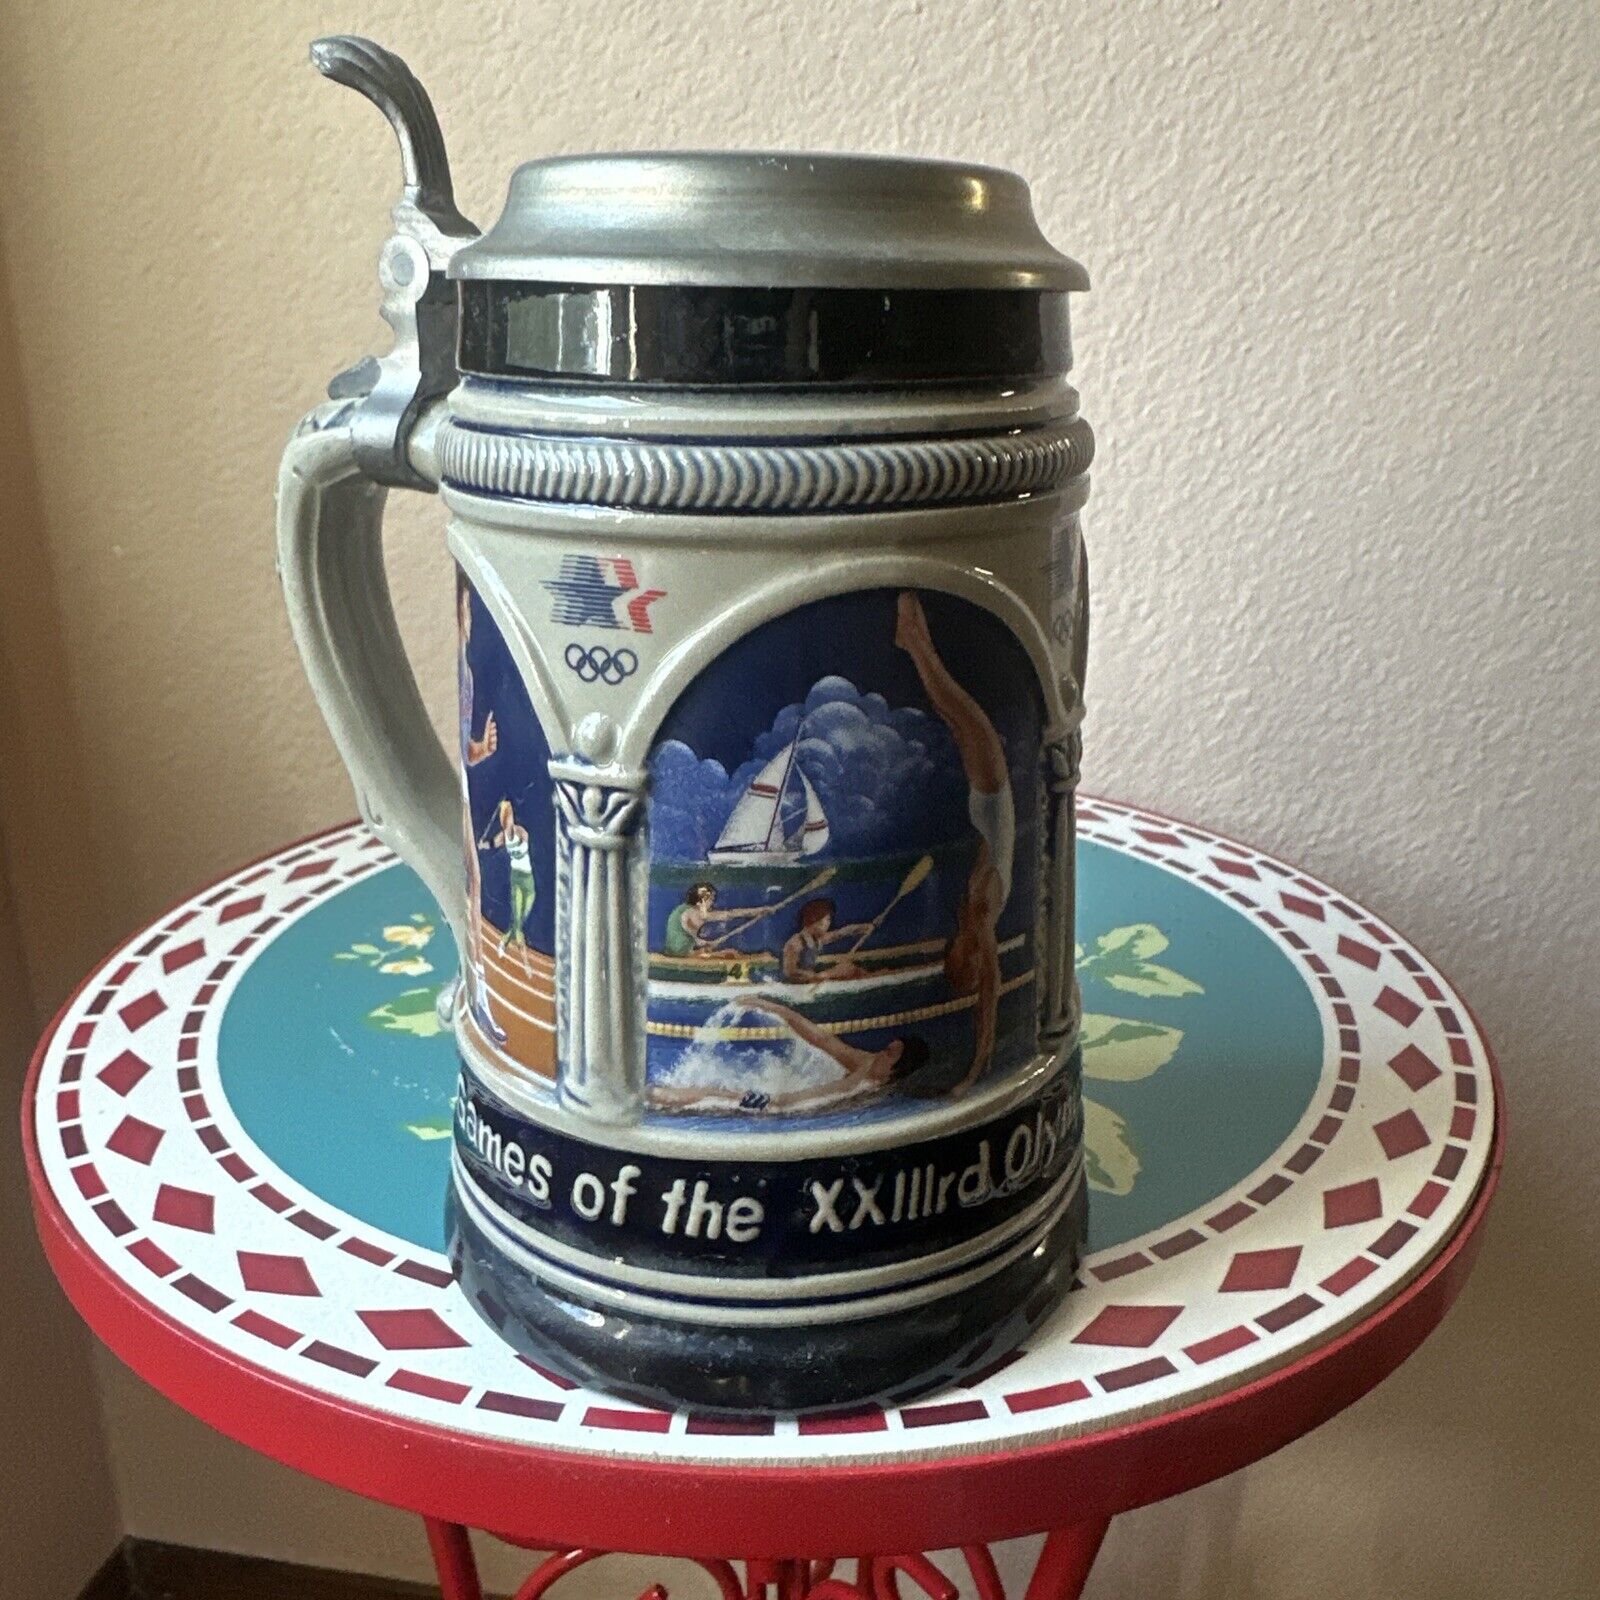 1984 Los Angeles Limited Edition Beer Stein